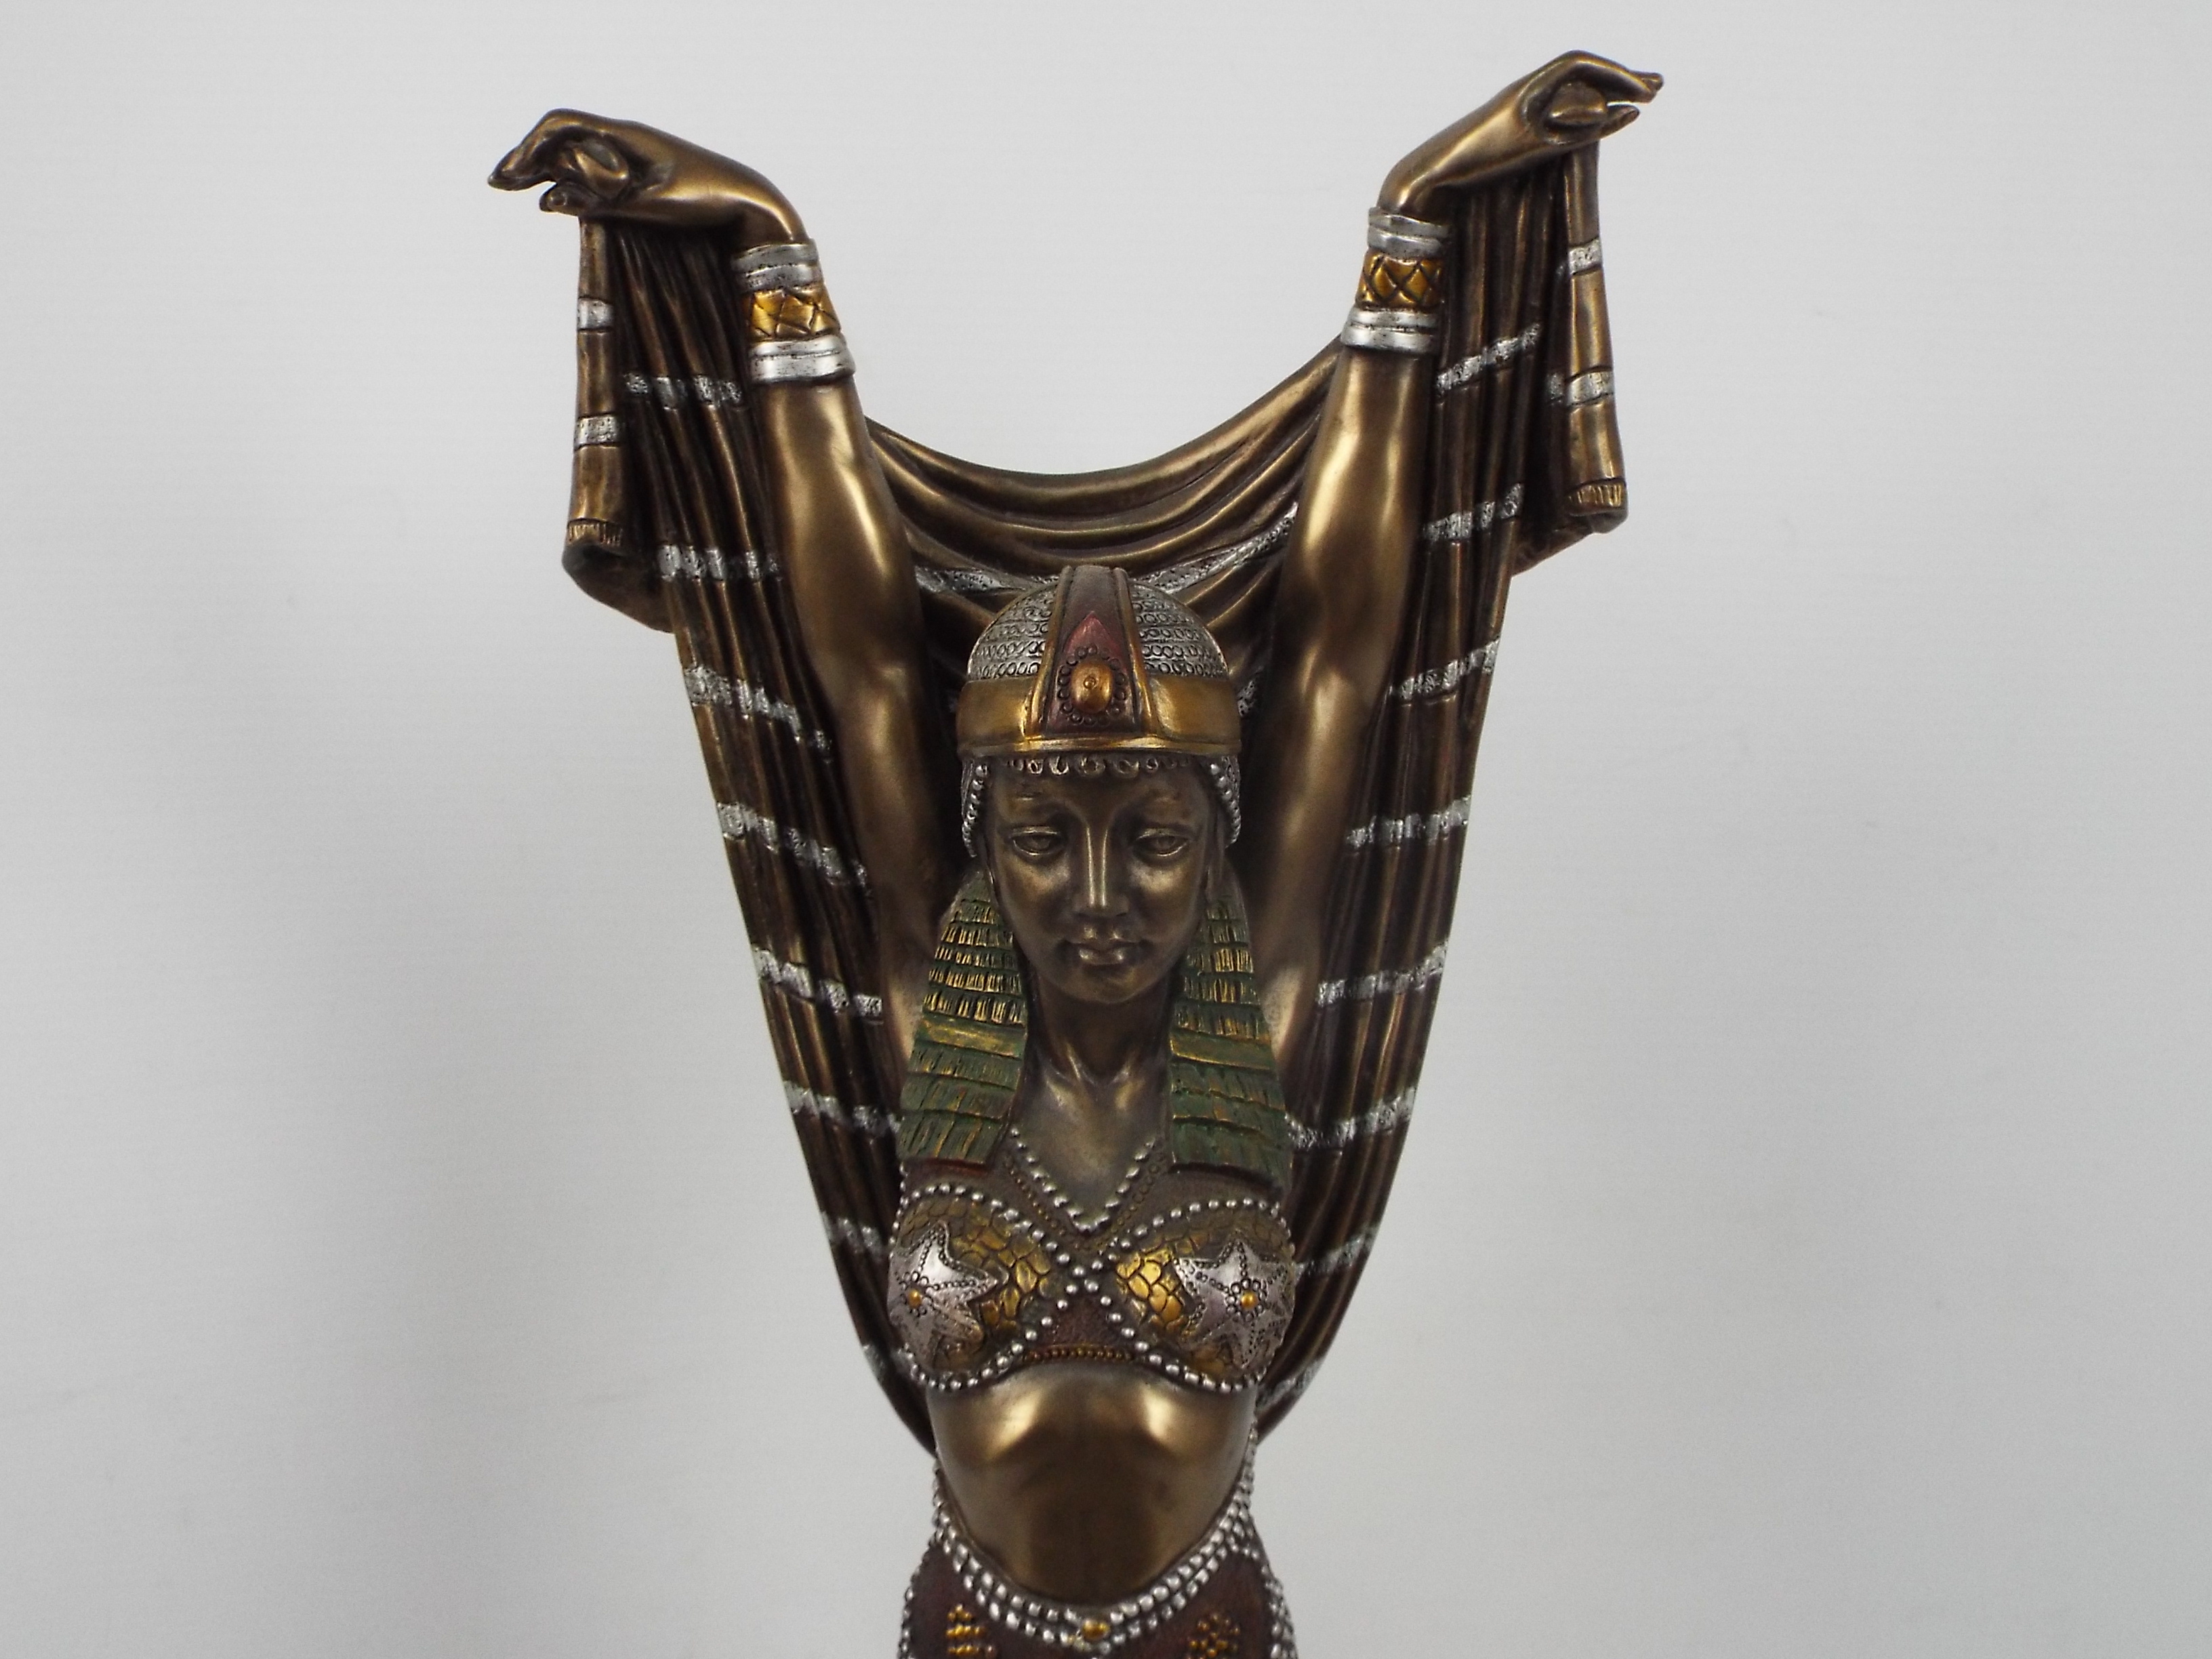 A large Art Deco style figure depicting an Egyptian style female with arms raised, - Image 2 of 6